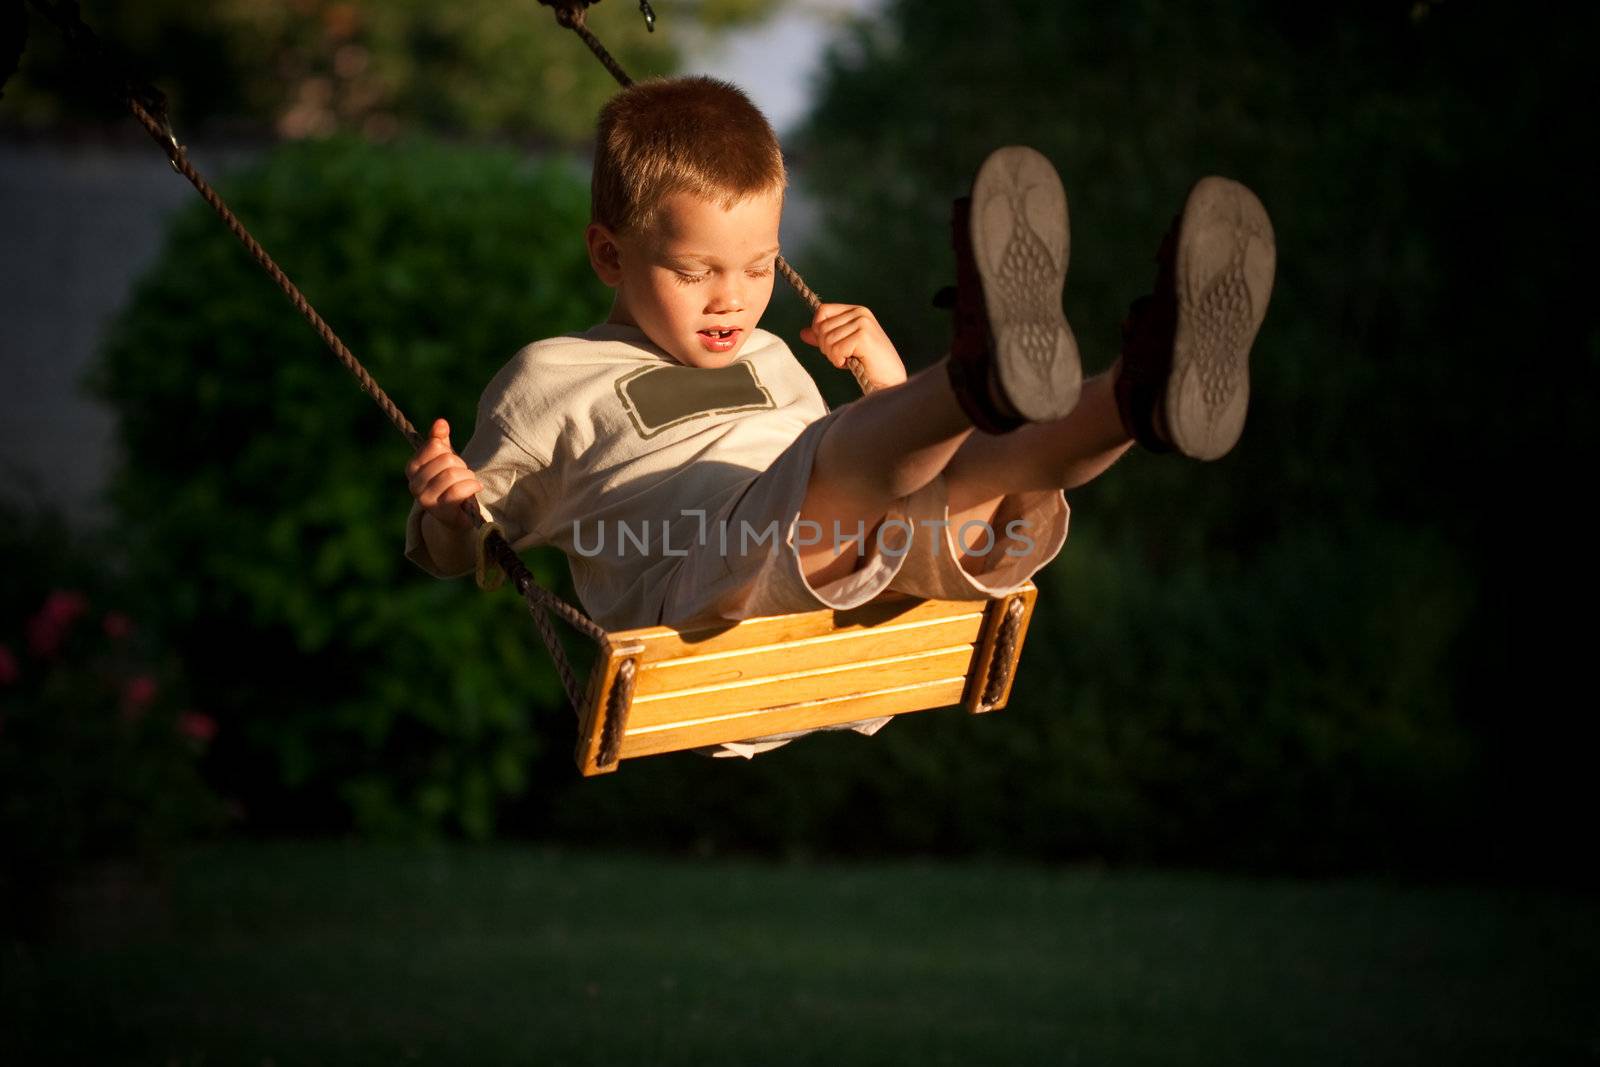 A young child playing on a swing